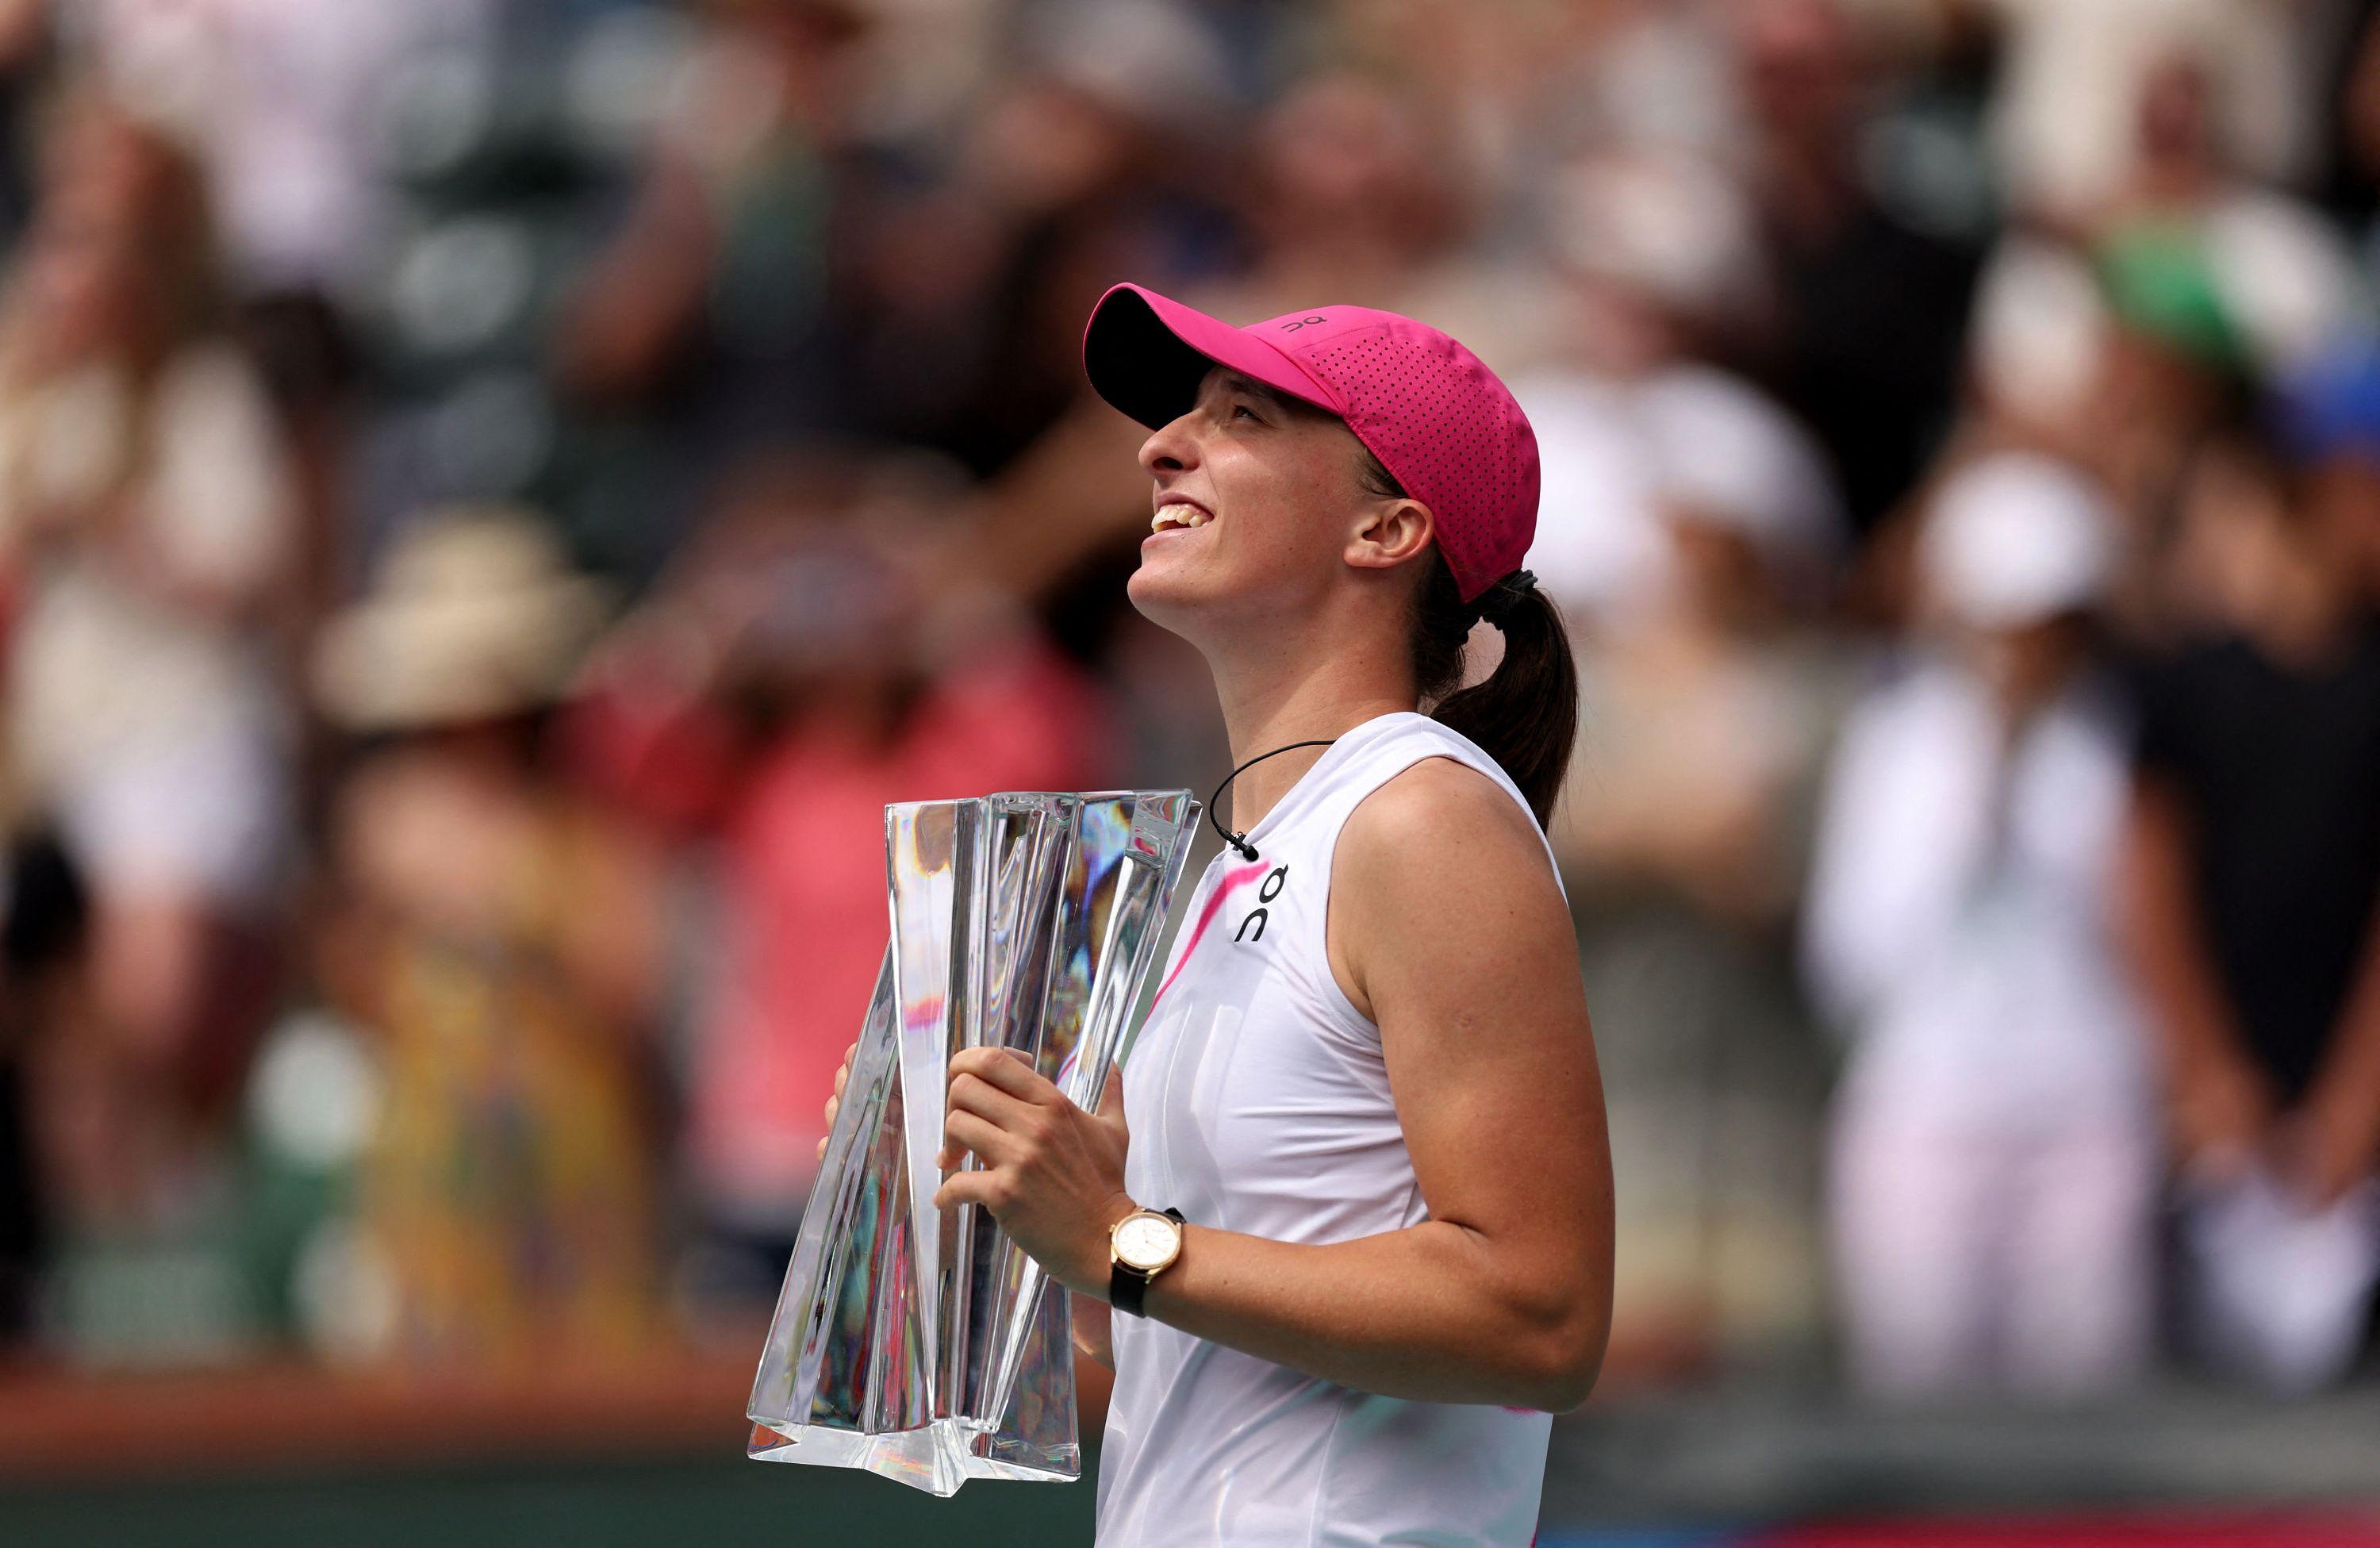 Tennis: Swiatek dismisses Sakkari and wins Indian Wells for the second time